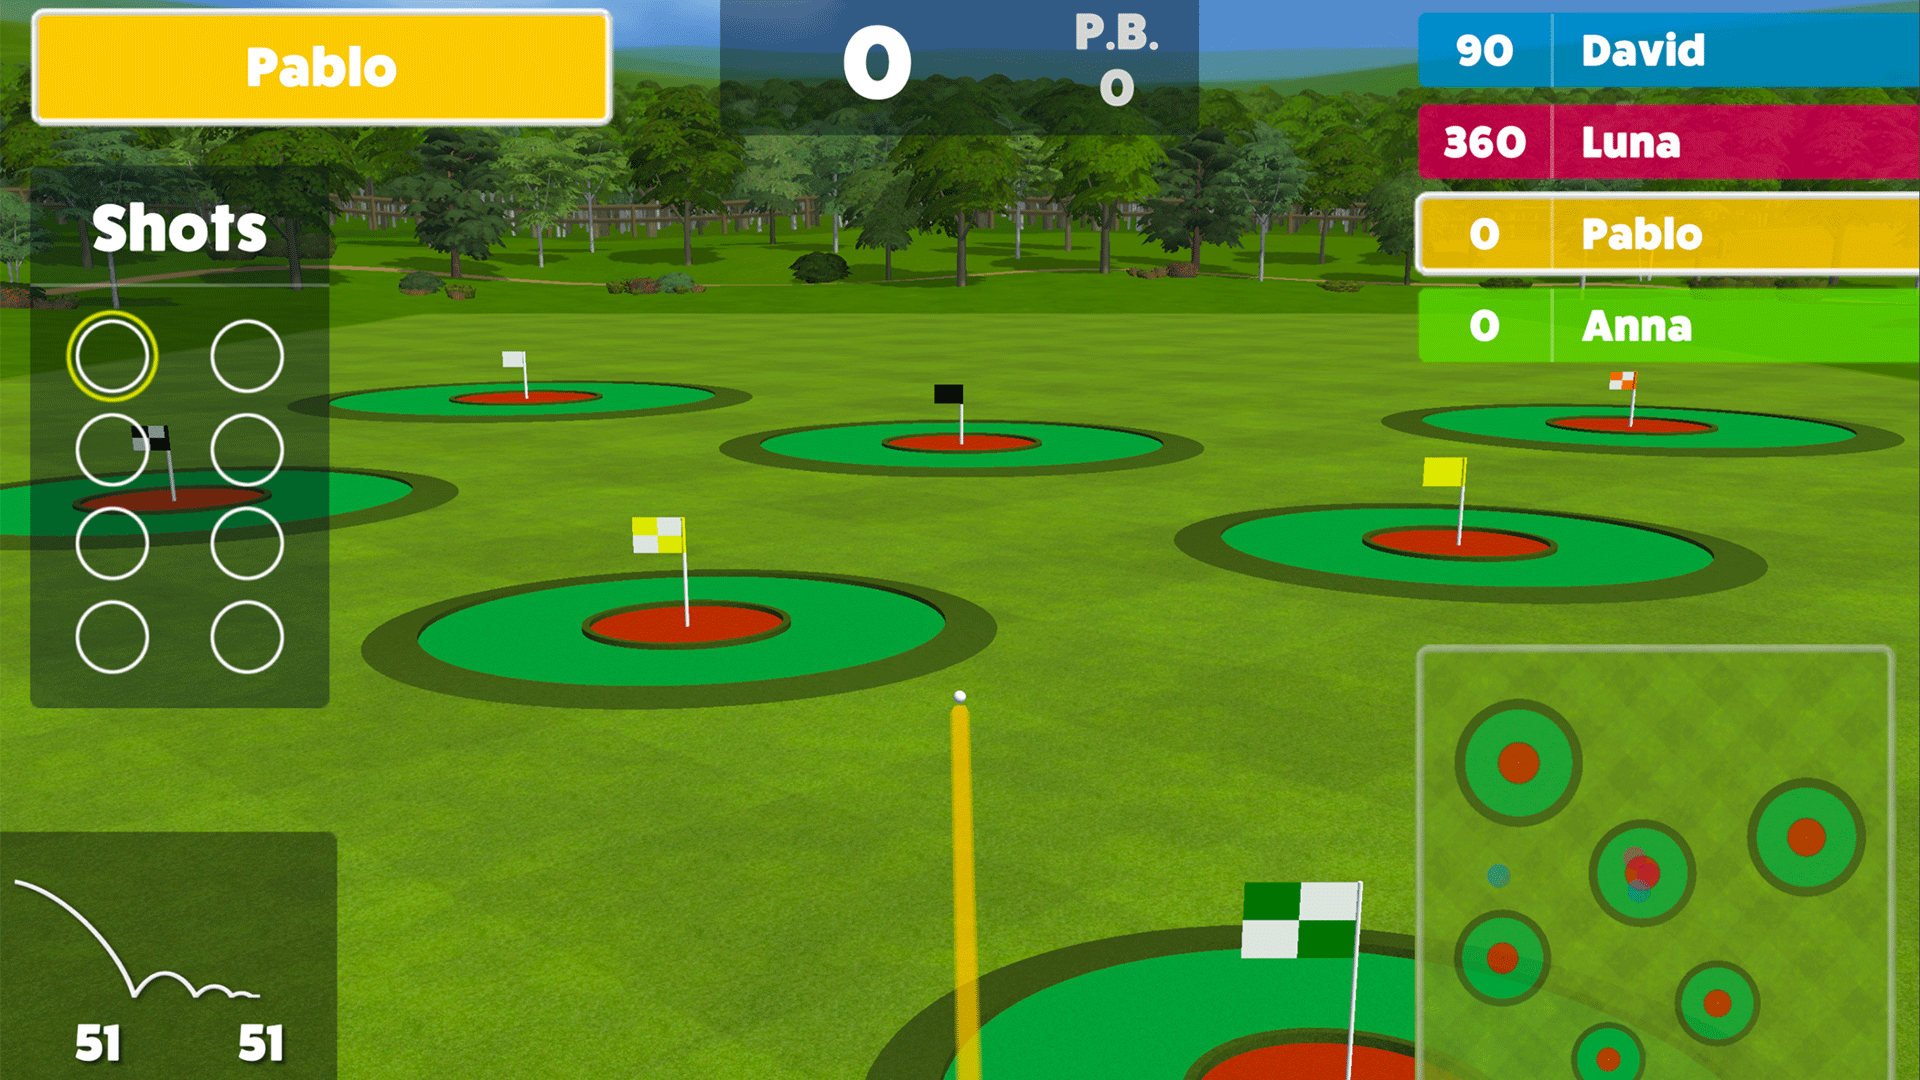 Awesome Golf for Launch Pro